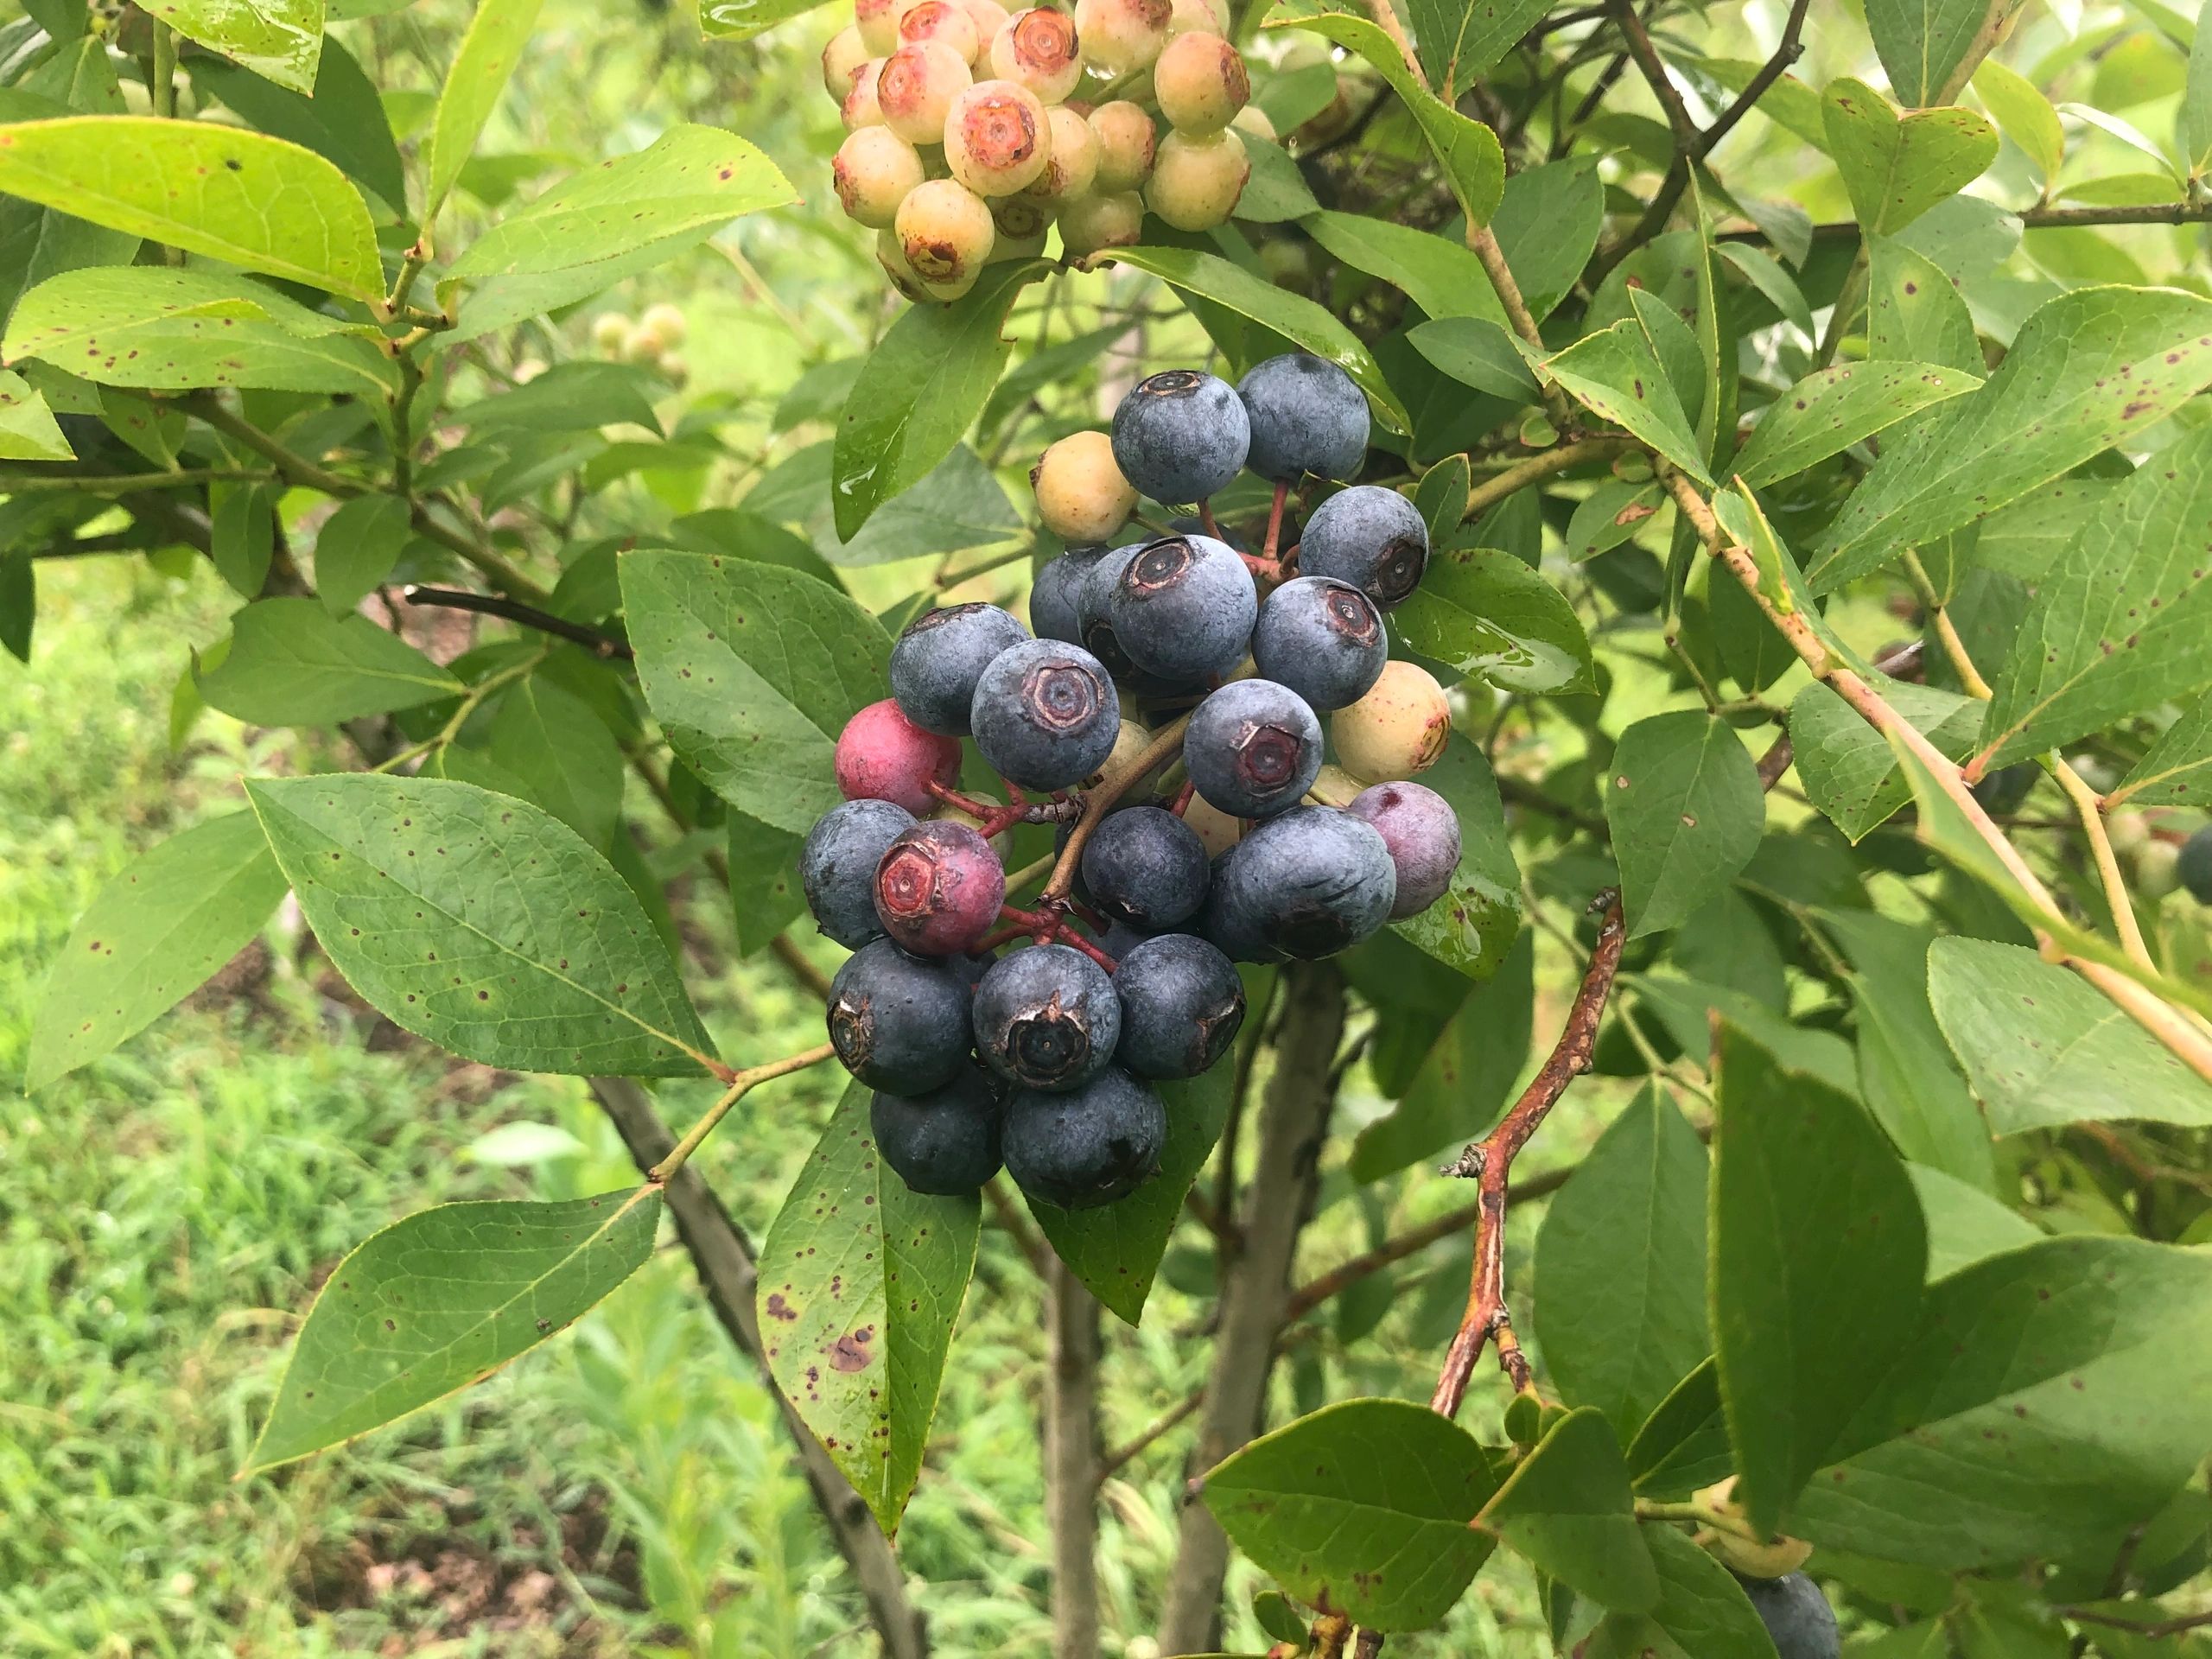 The flavor is incredible when organic blueberries are allowed to ripen in the sun to their peak.